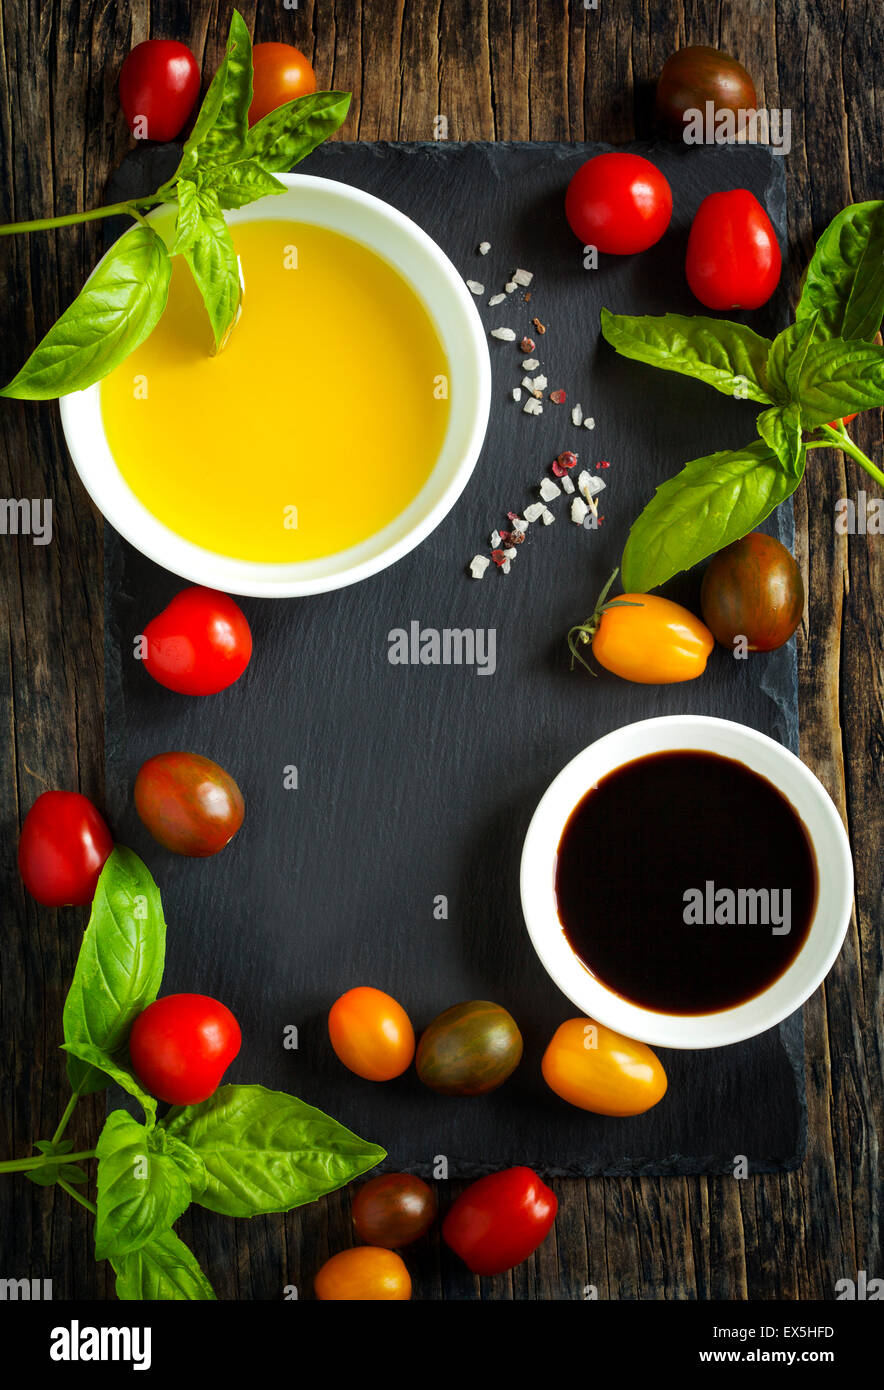 Fresh tomatoes, basil, olive oil and balsamic vinegar on wooden background with black board, top view Stock Photo